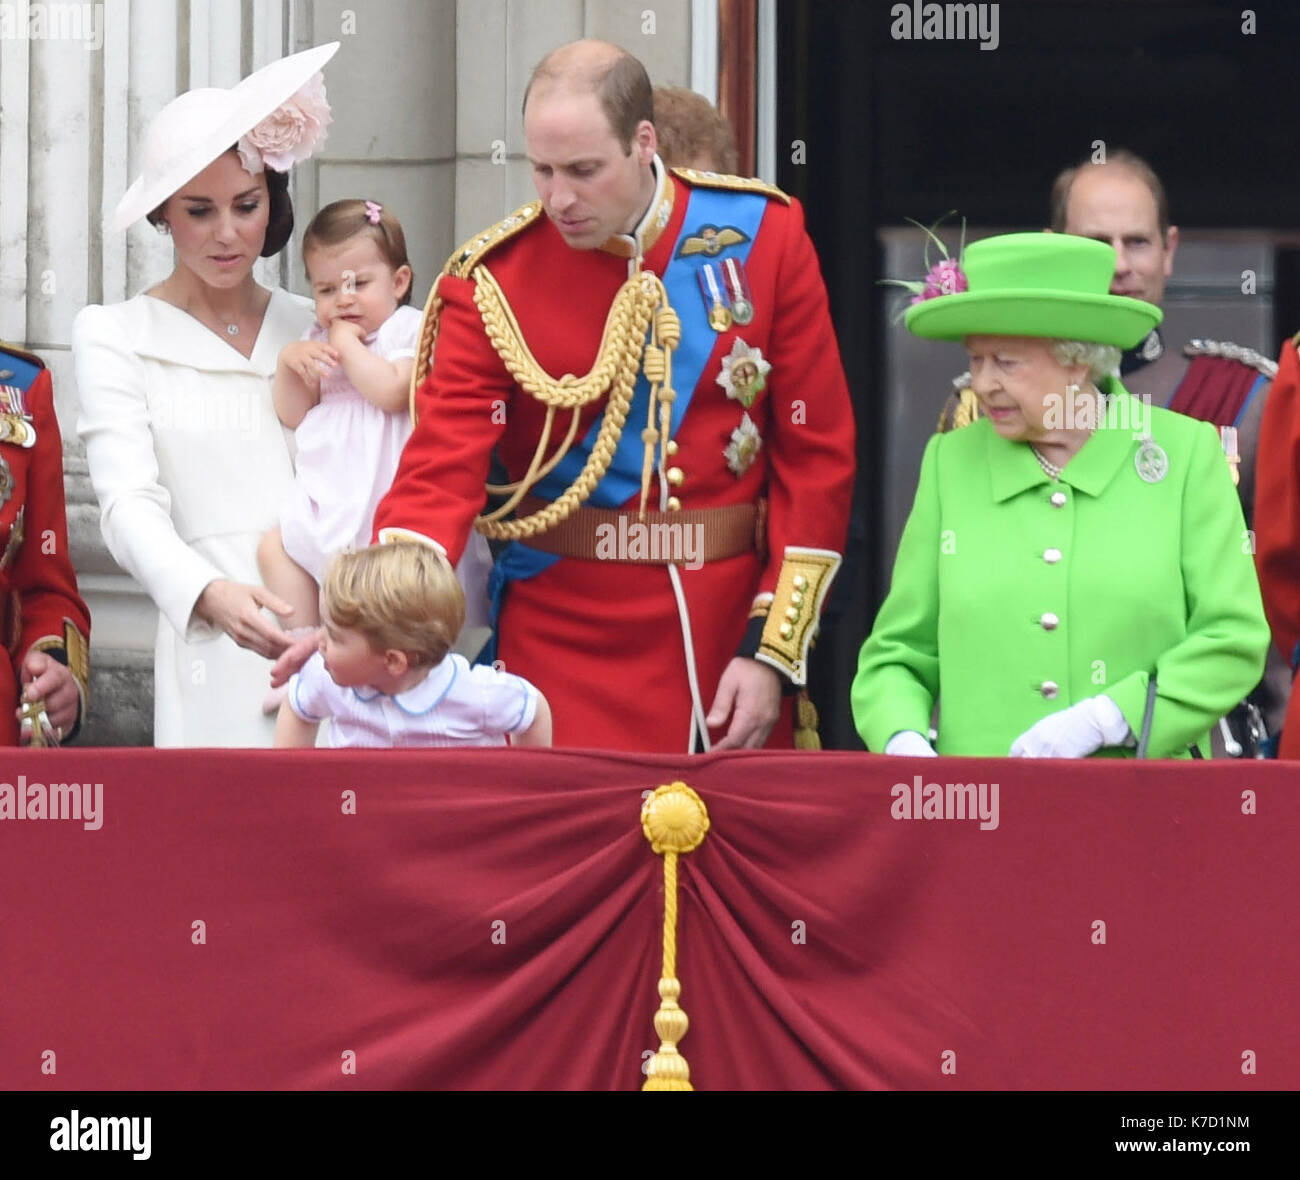 Photo Must Be Credited ©Alpha Press 079965 11/06/2016 Kate Duchess of Cambridge Katherine Catherine Middleton Princess Charlotte and Prince George with Prince William Duke Of Cambridge and Queen Elizabeth II  in London for Trooping the Colour 2016 during The Queen's 90th Birthday Celebrations. Stock Photo